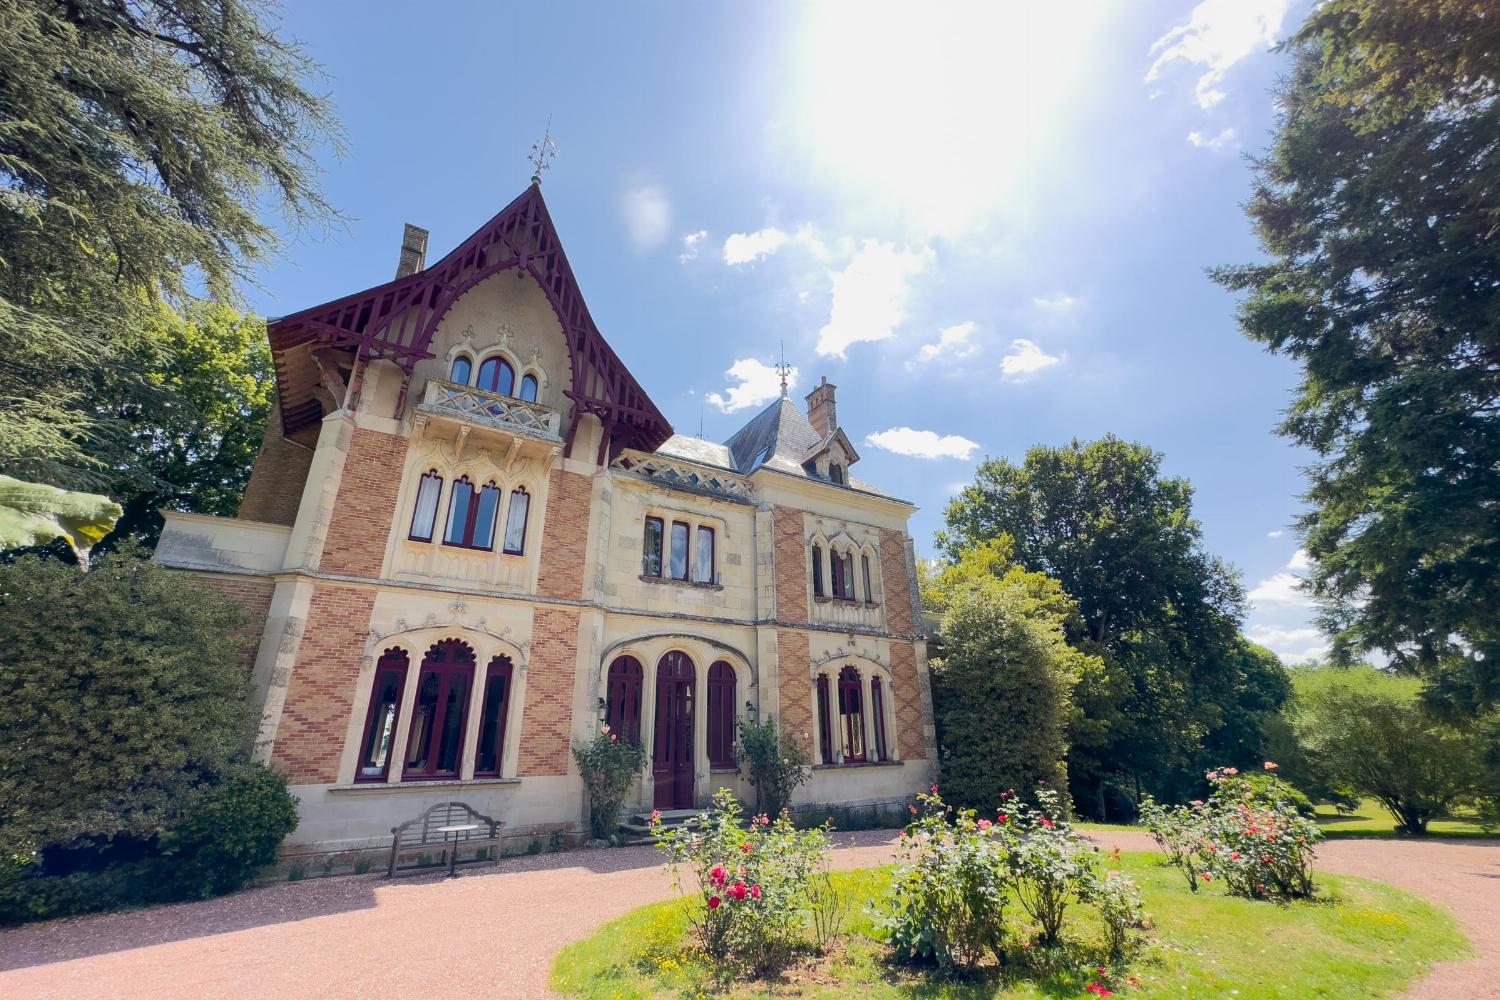 Holiday château in Nouvelle-Aquitaine